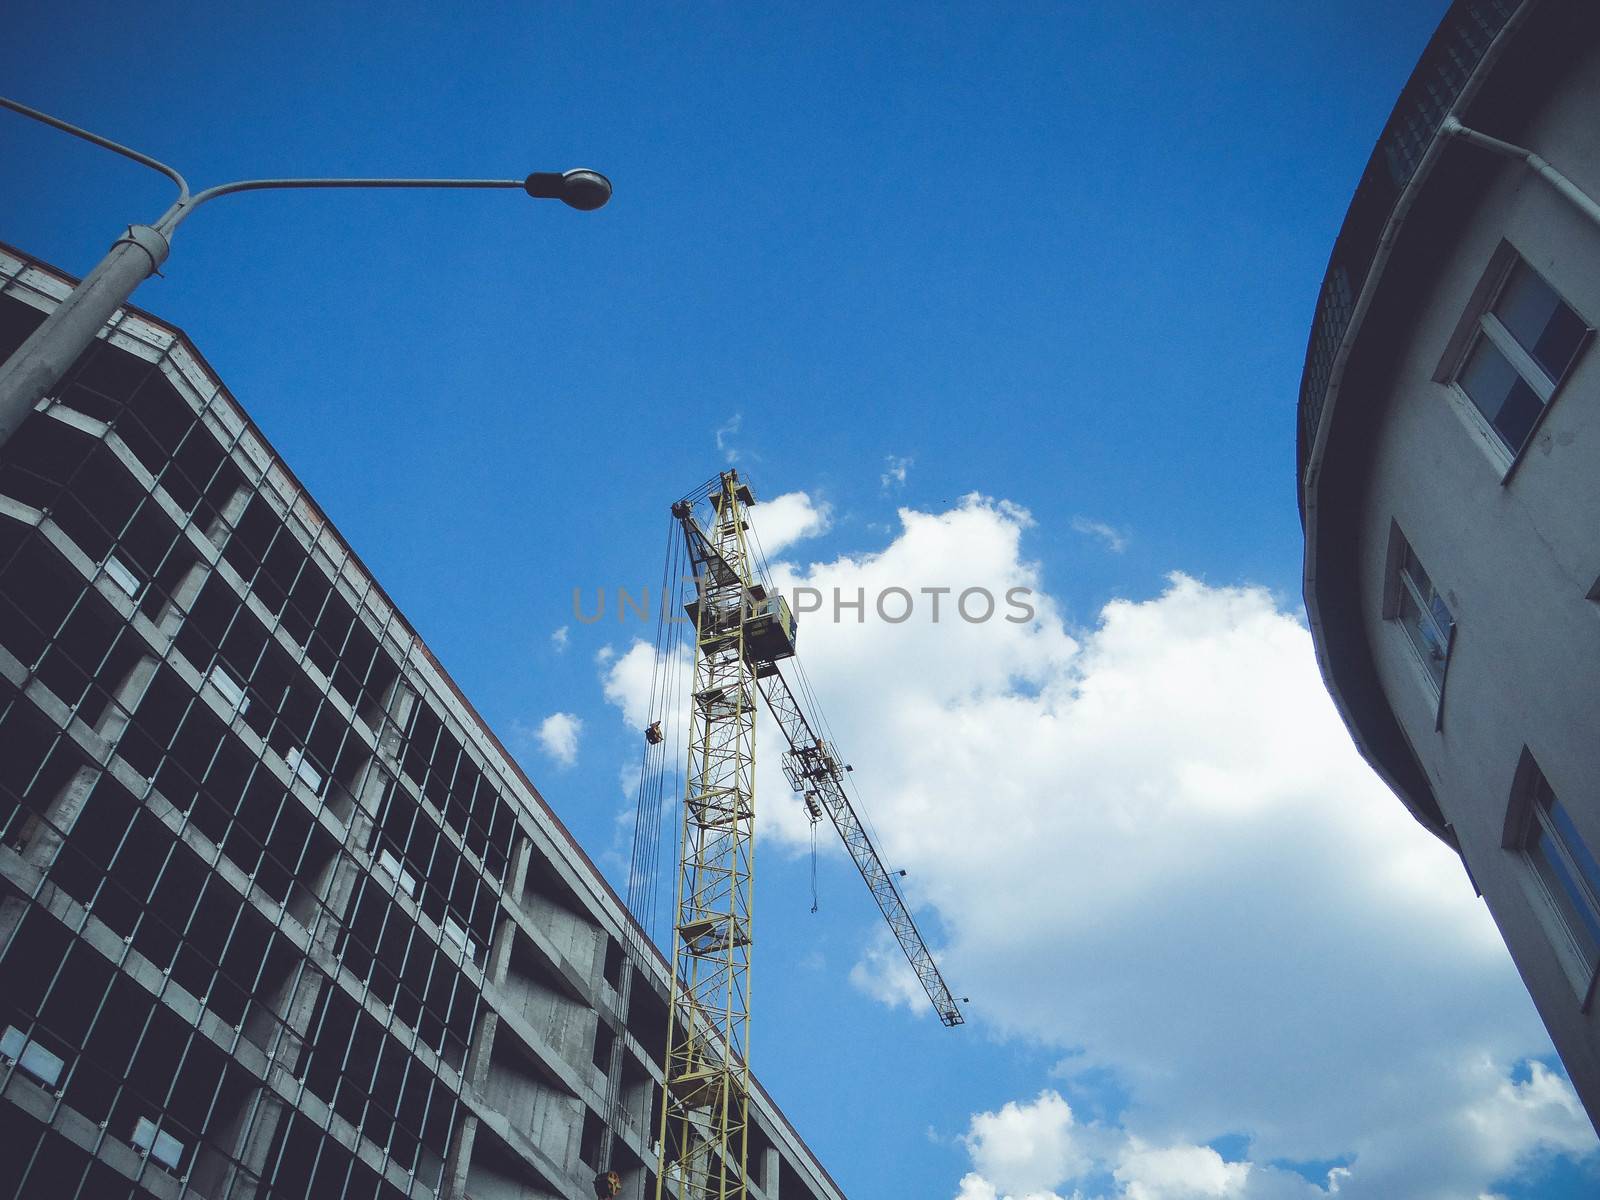 Construction site with cranes by natali_brill